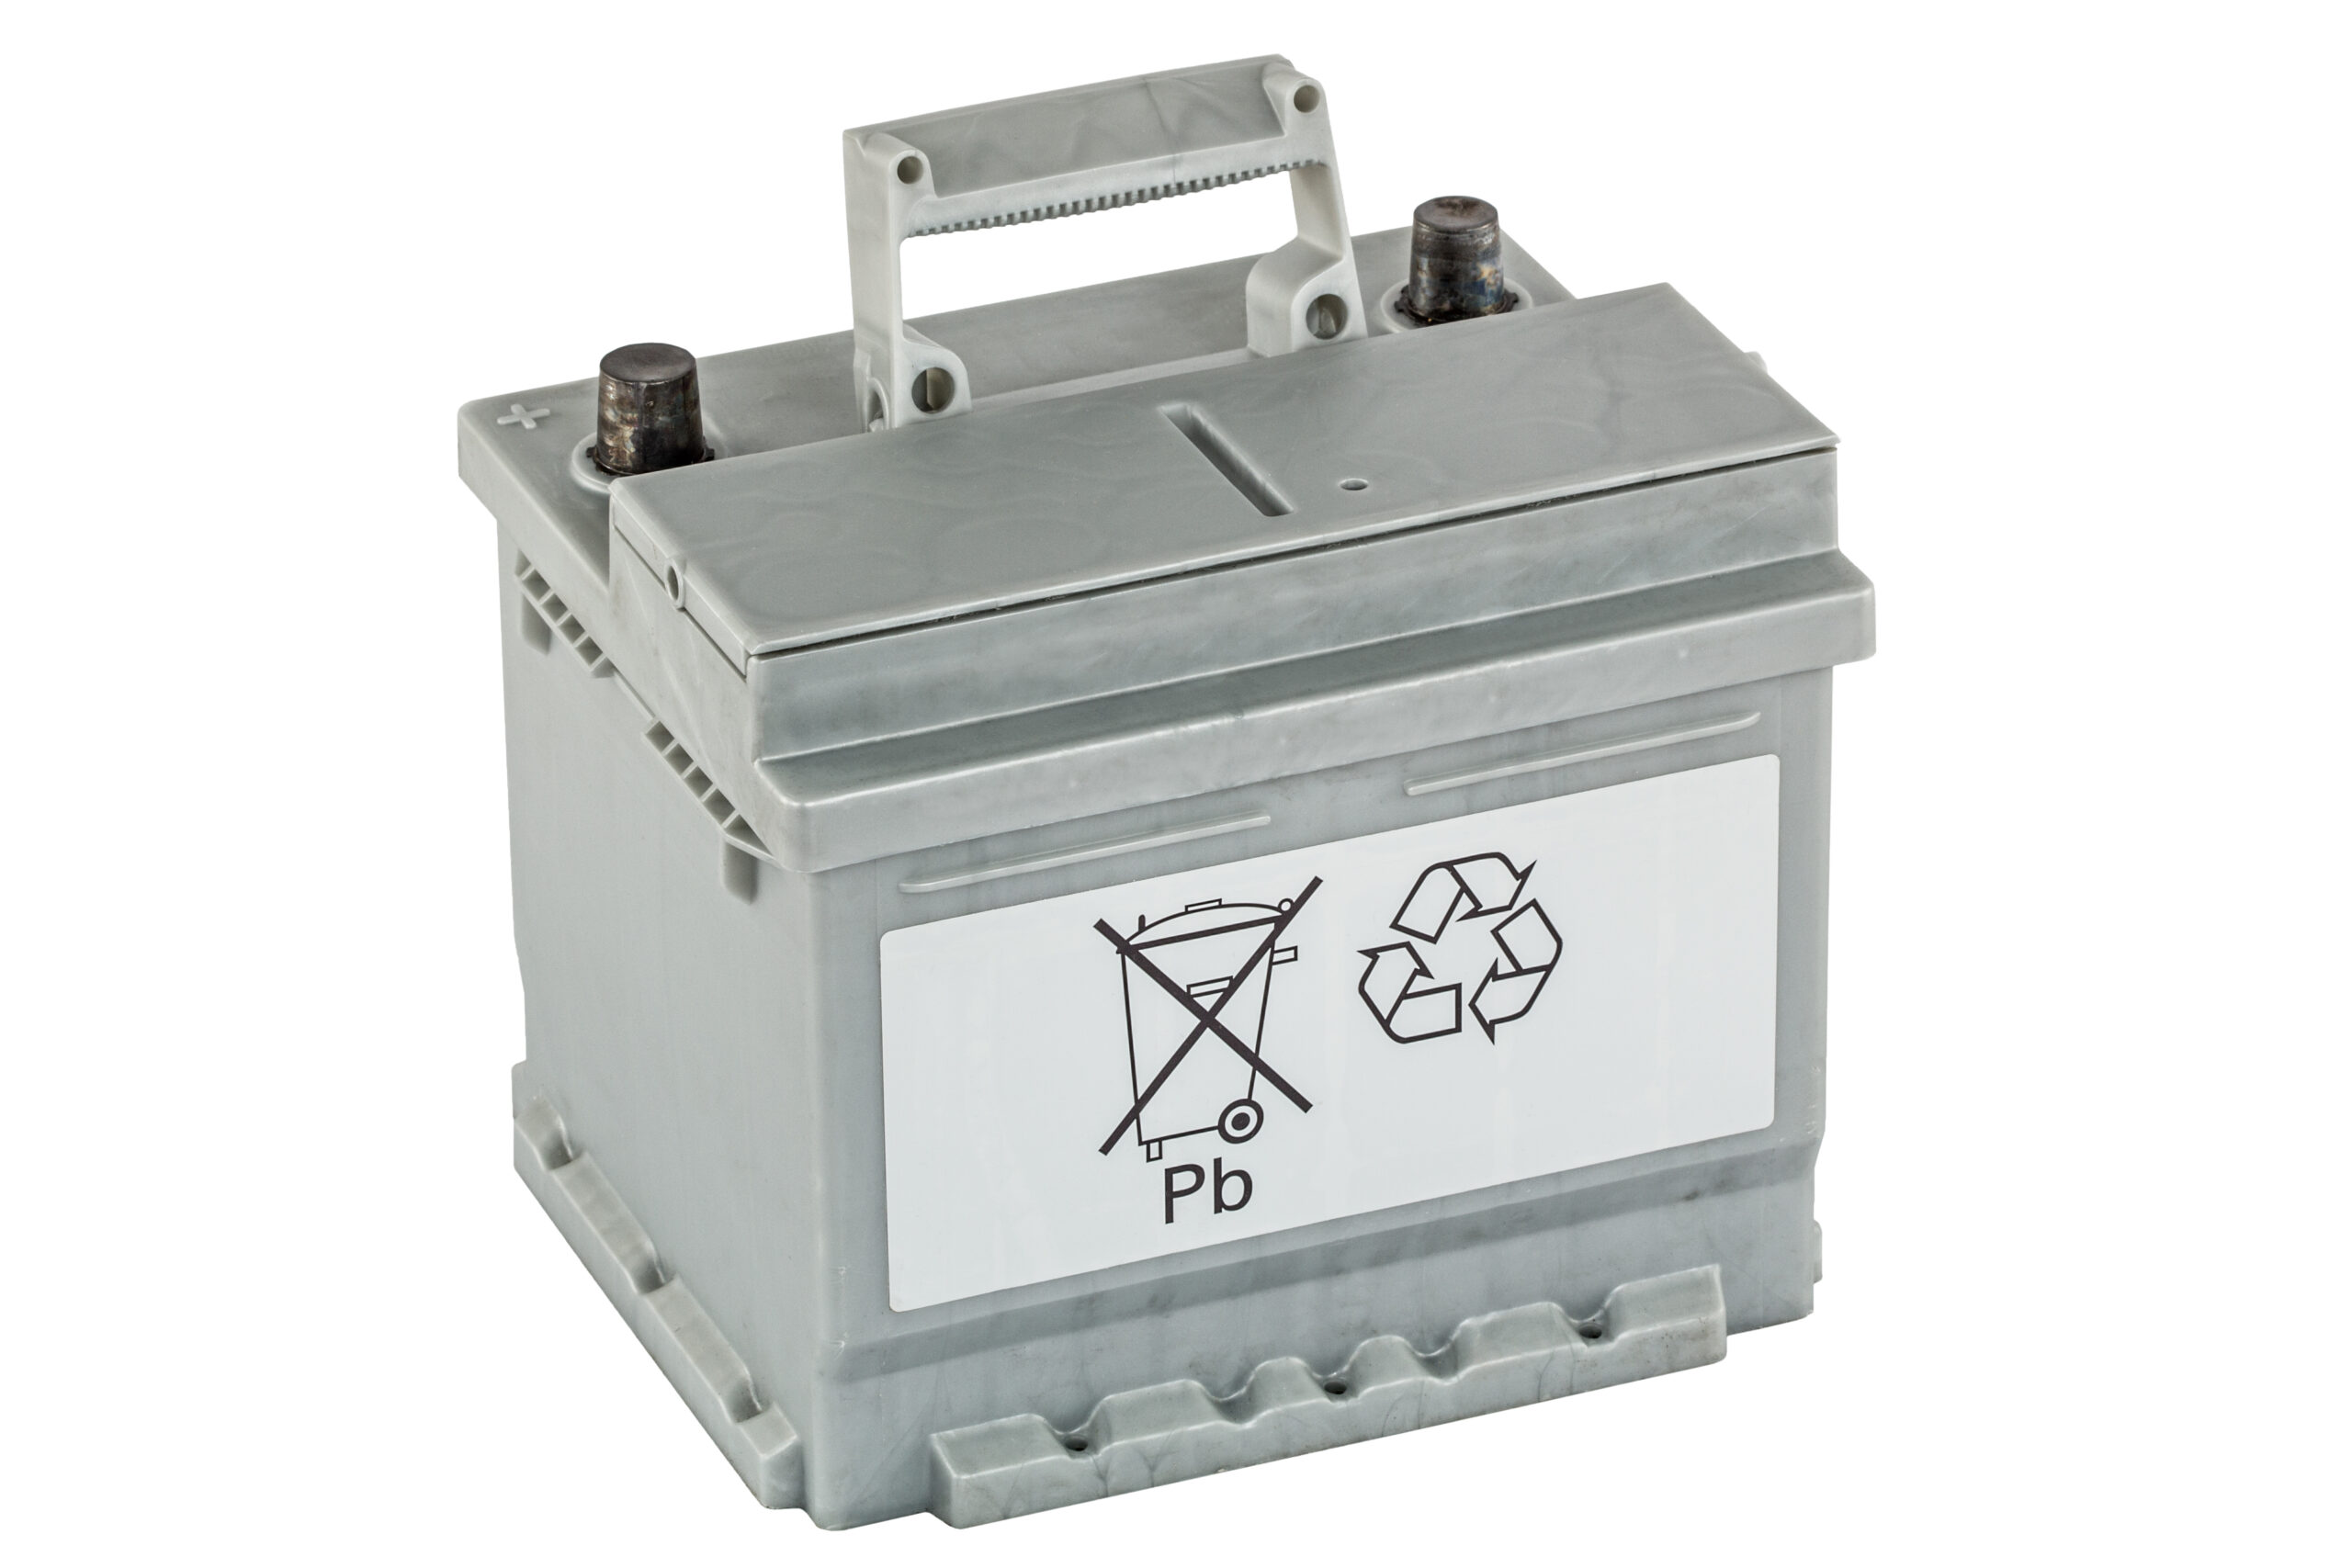 recycling of lead acid batteries isolated on whit 2023 09 22 23 21 01 utc scaled